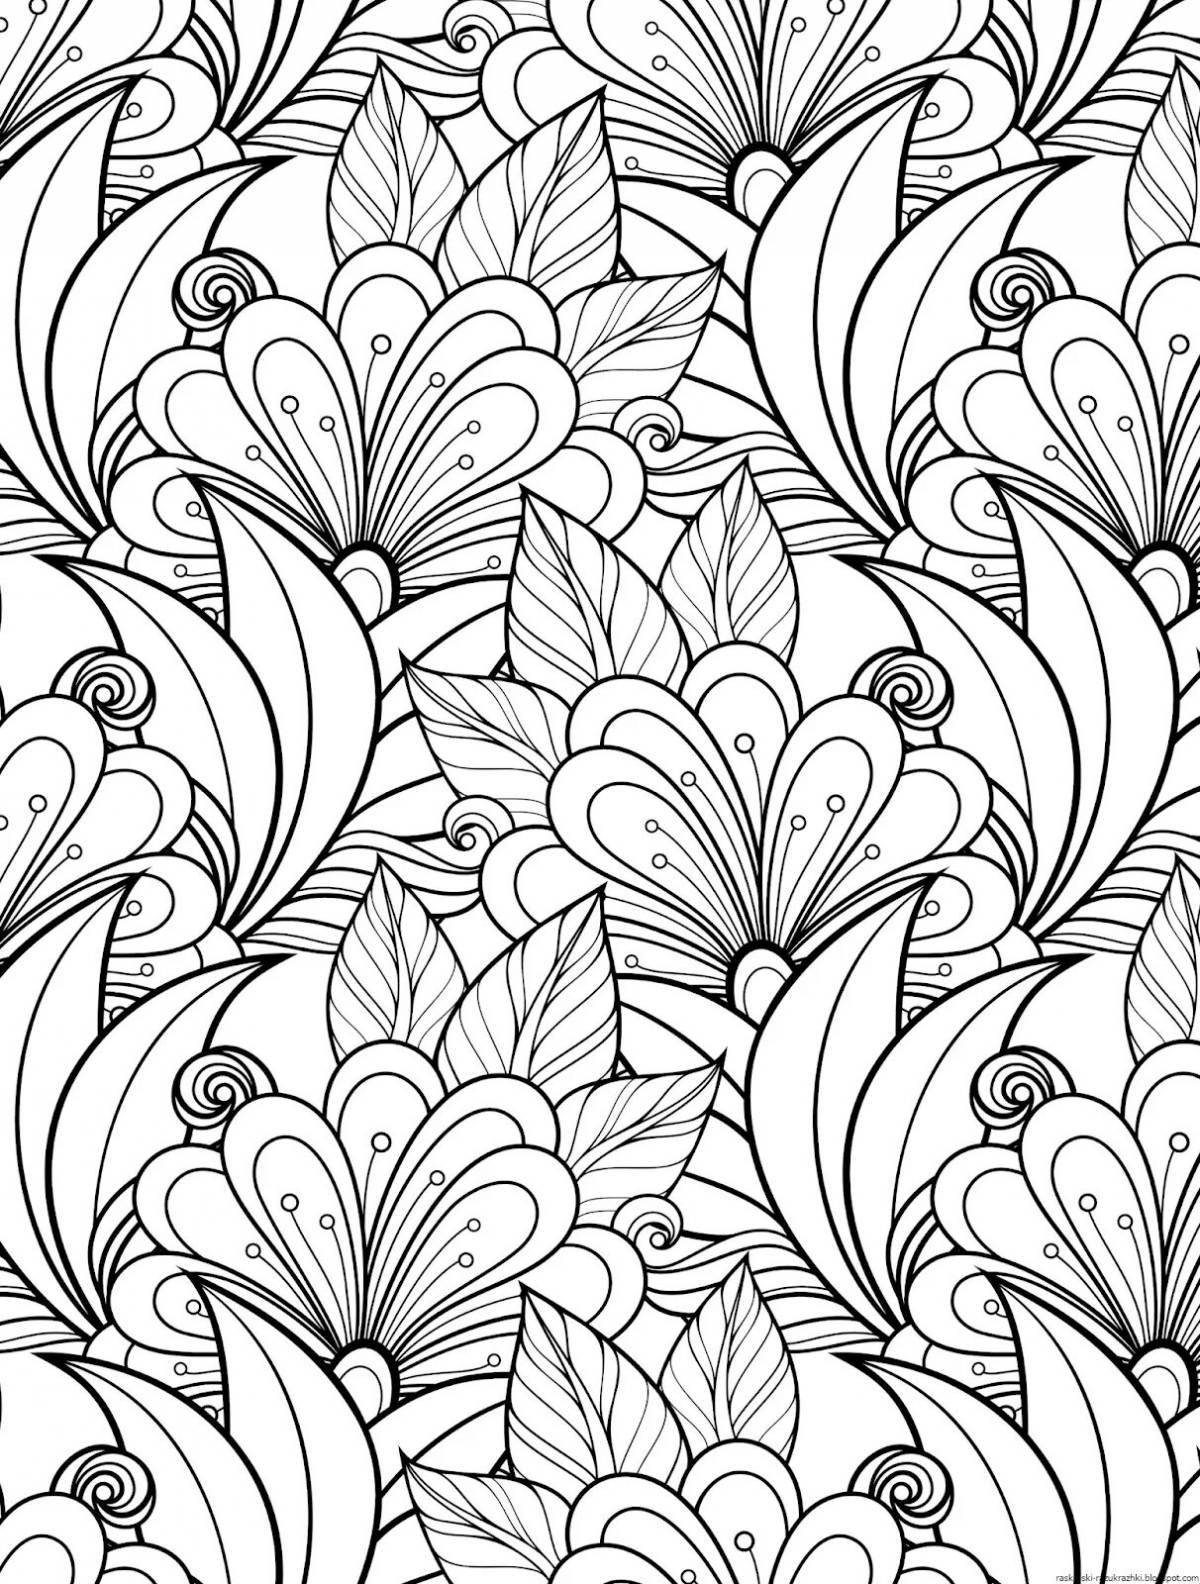 Visible good quality coloring page